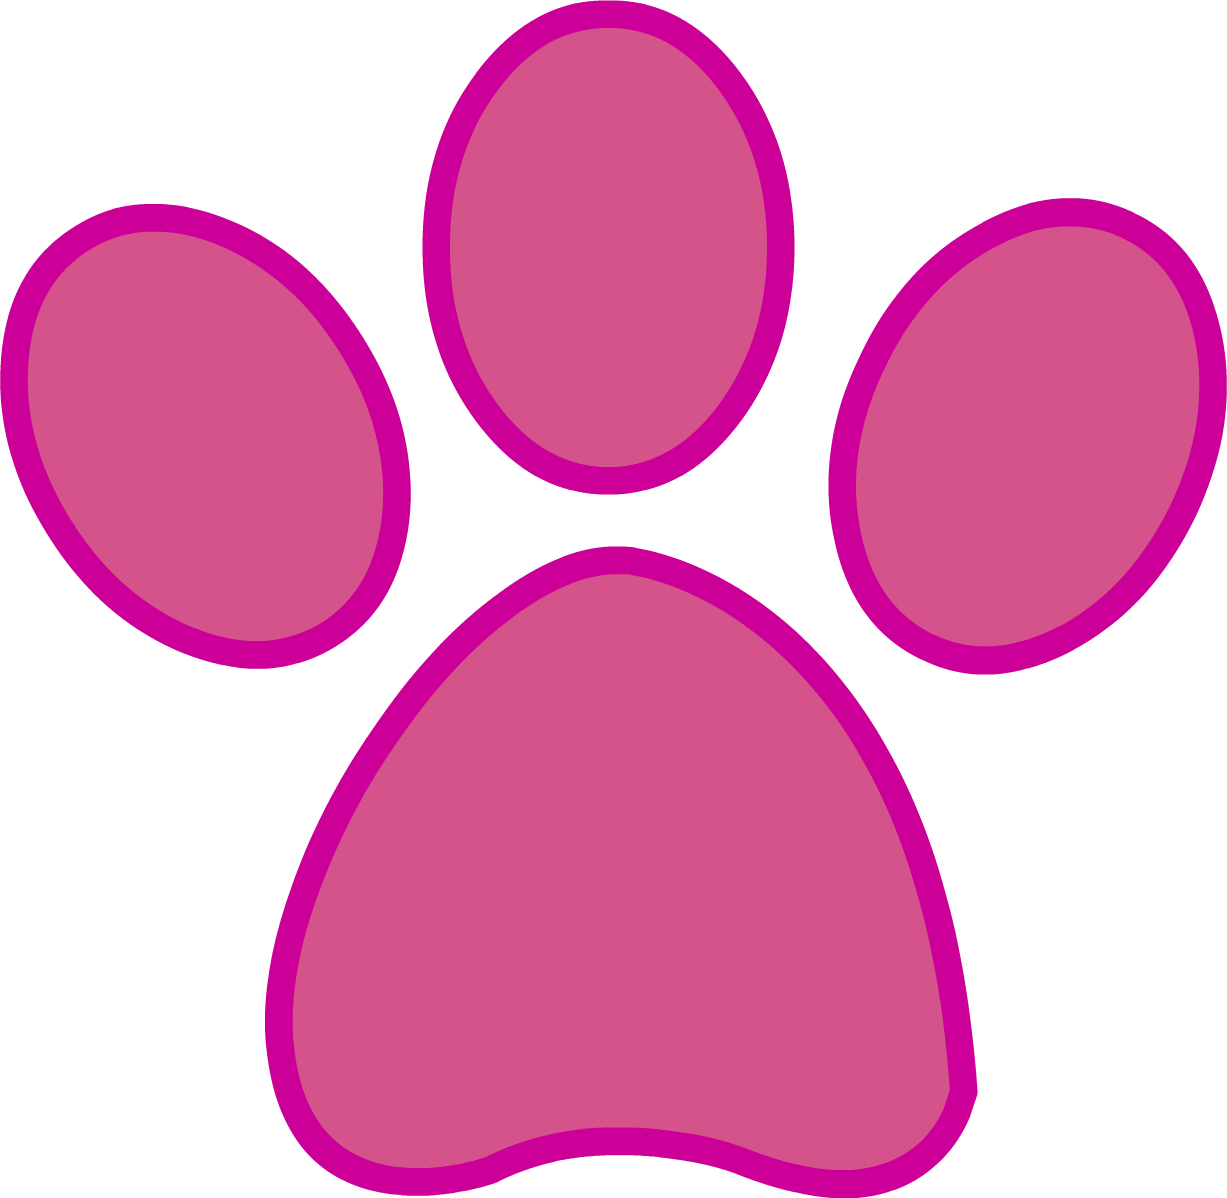 Pink Panther Paw Print (Commission) by kitkatyj on DeviantArt ...